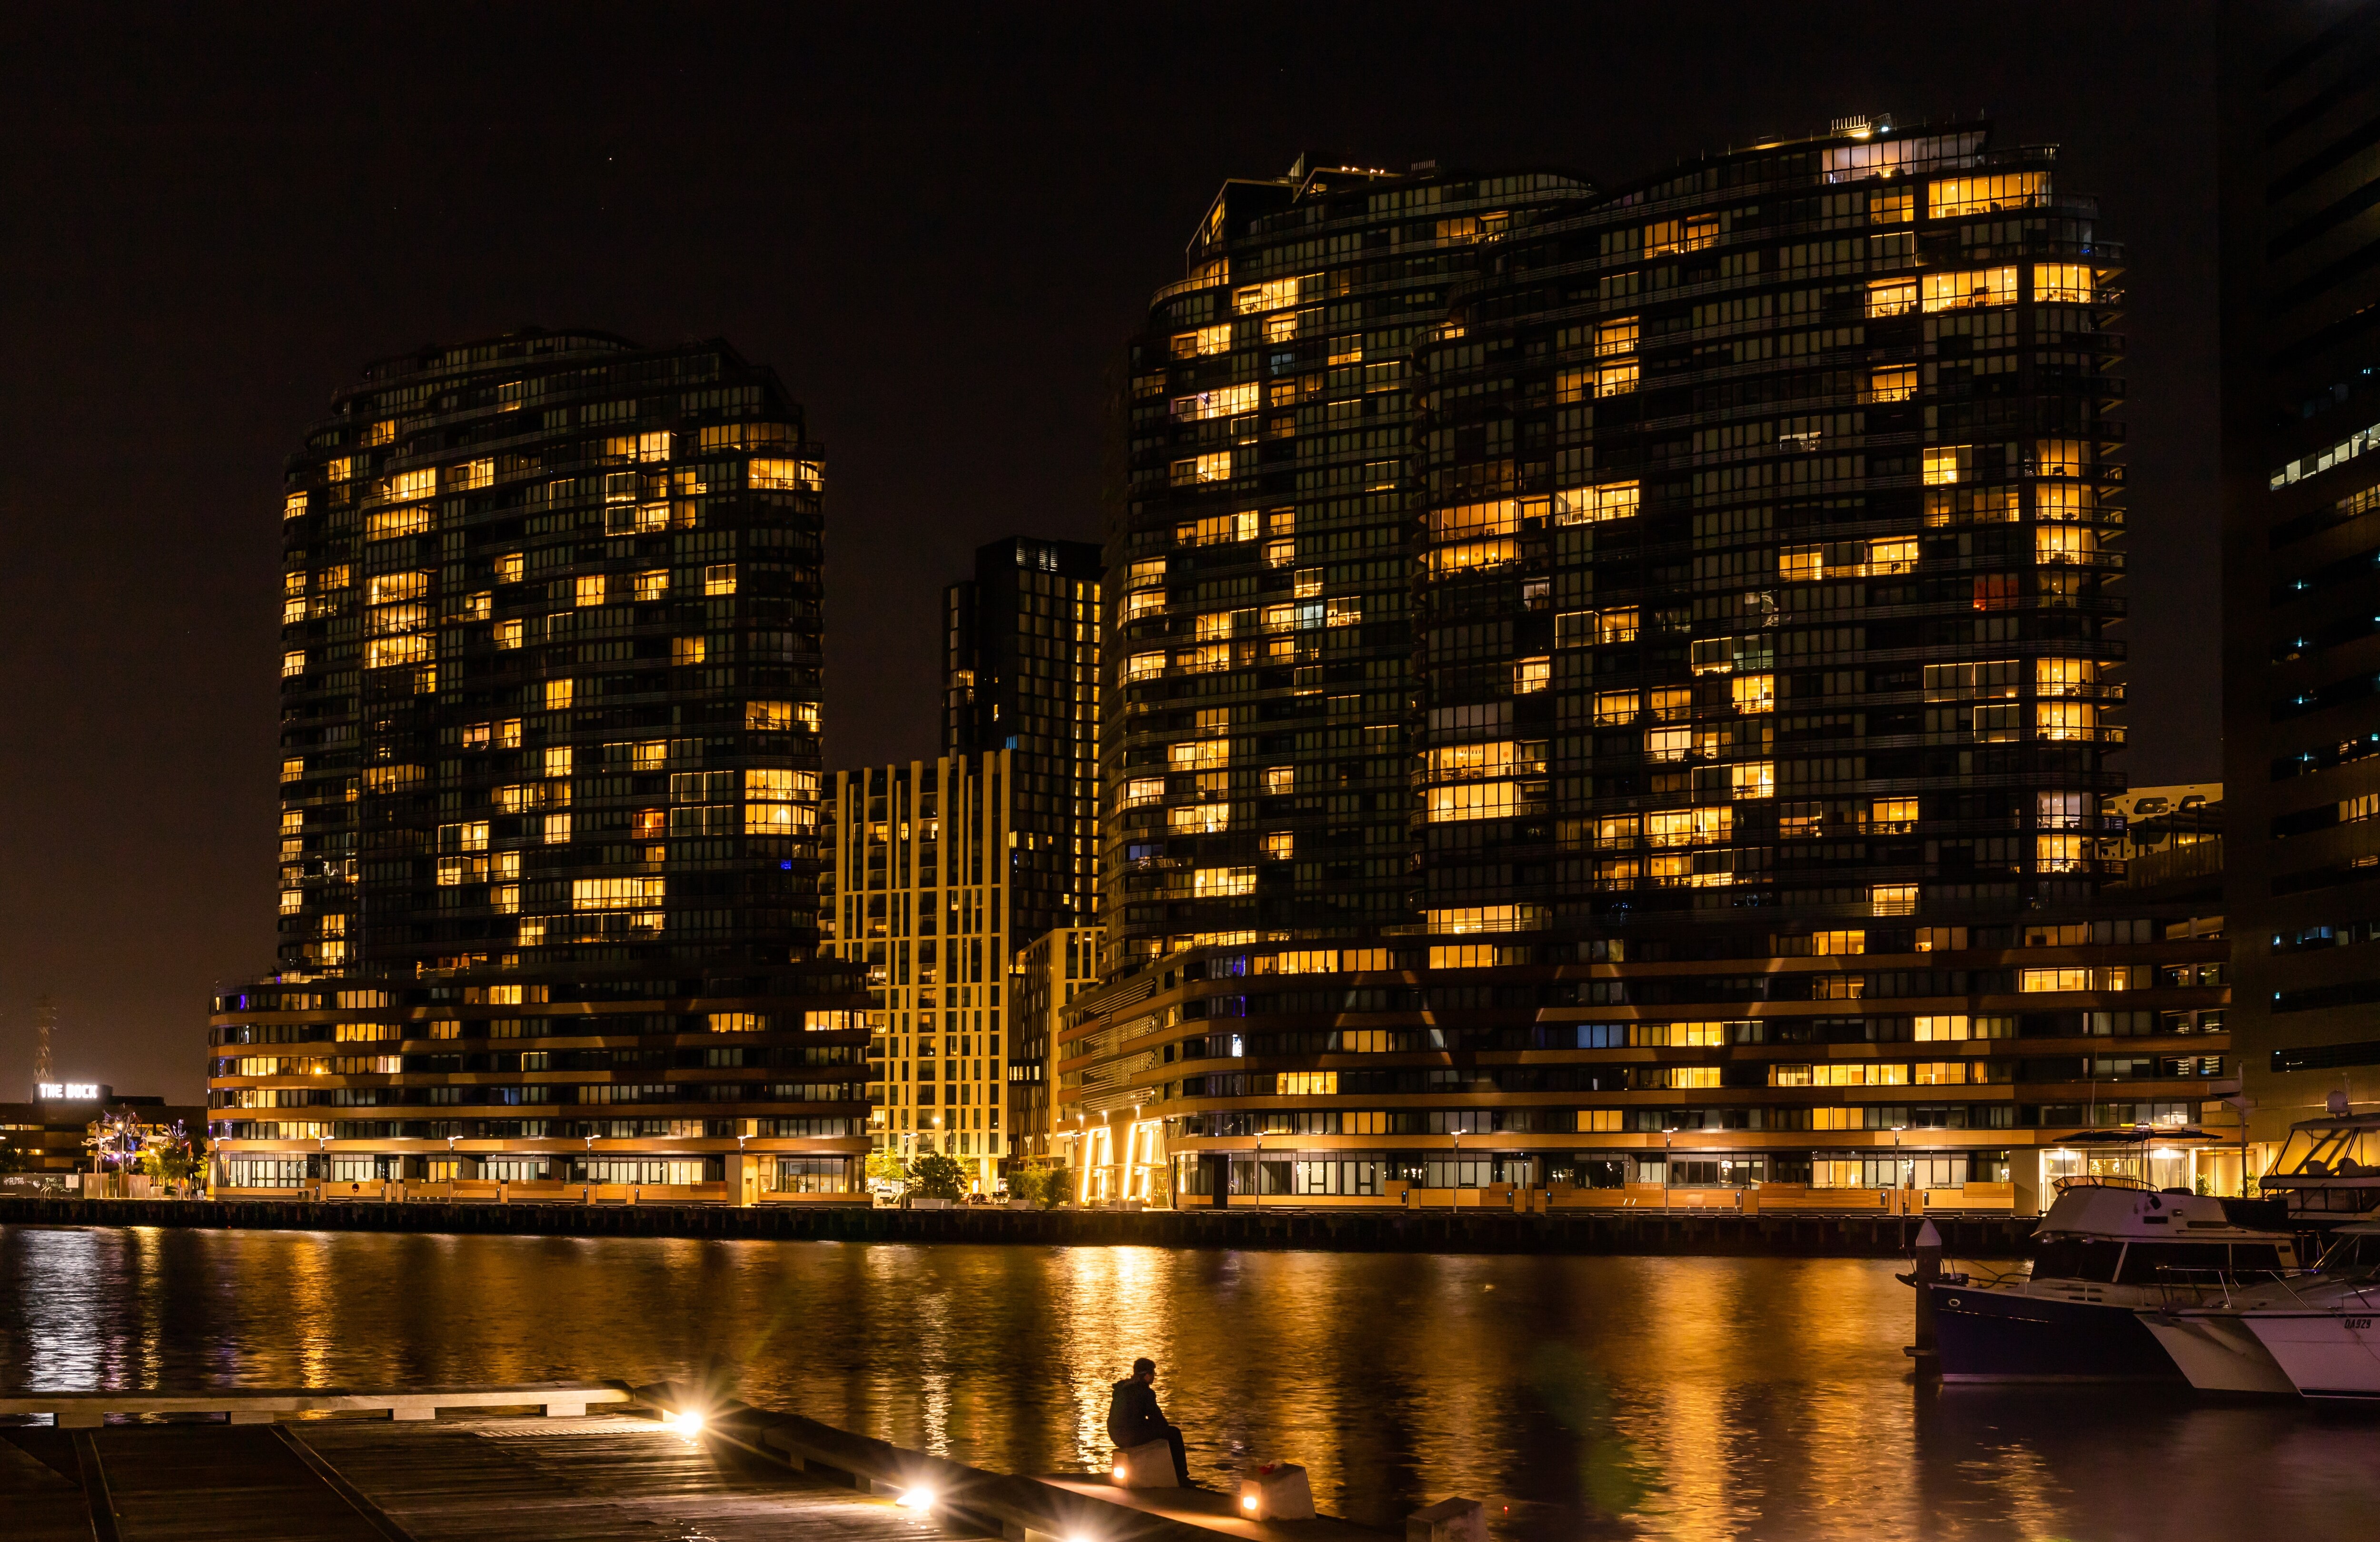 A man sitting on pier beside illuminated high buildings at night